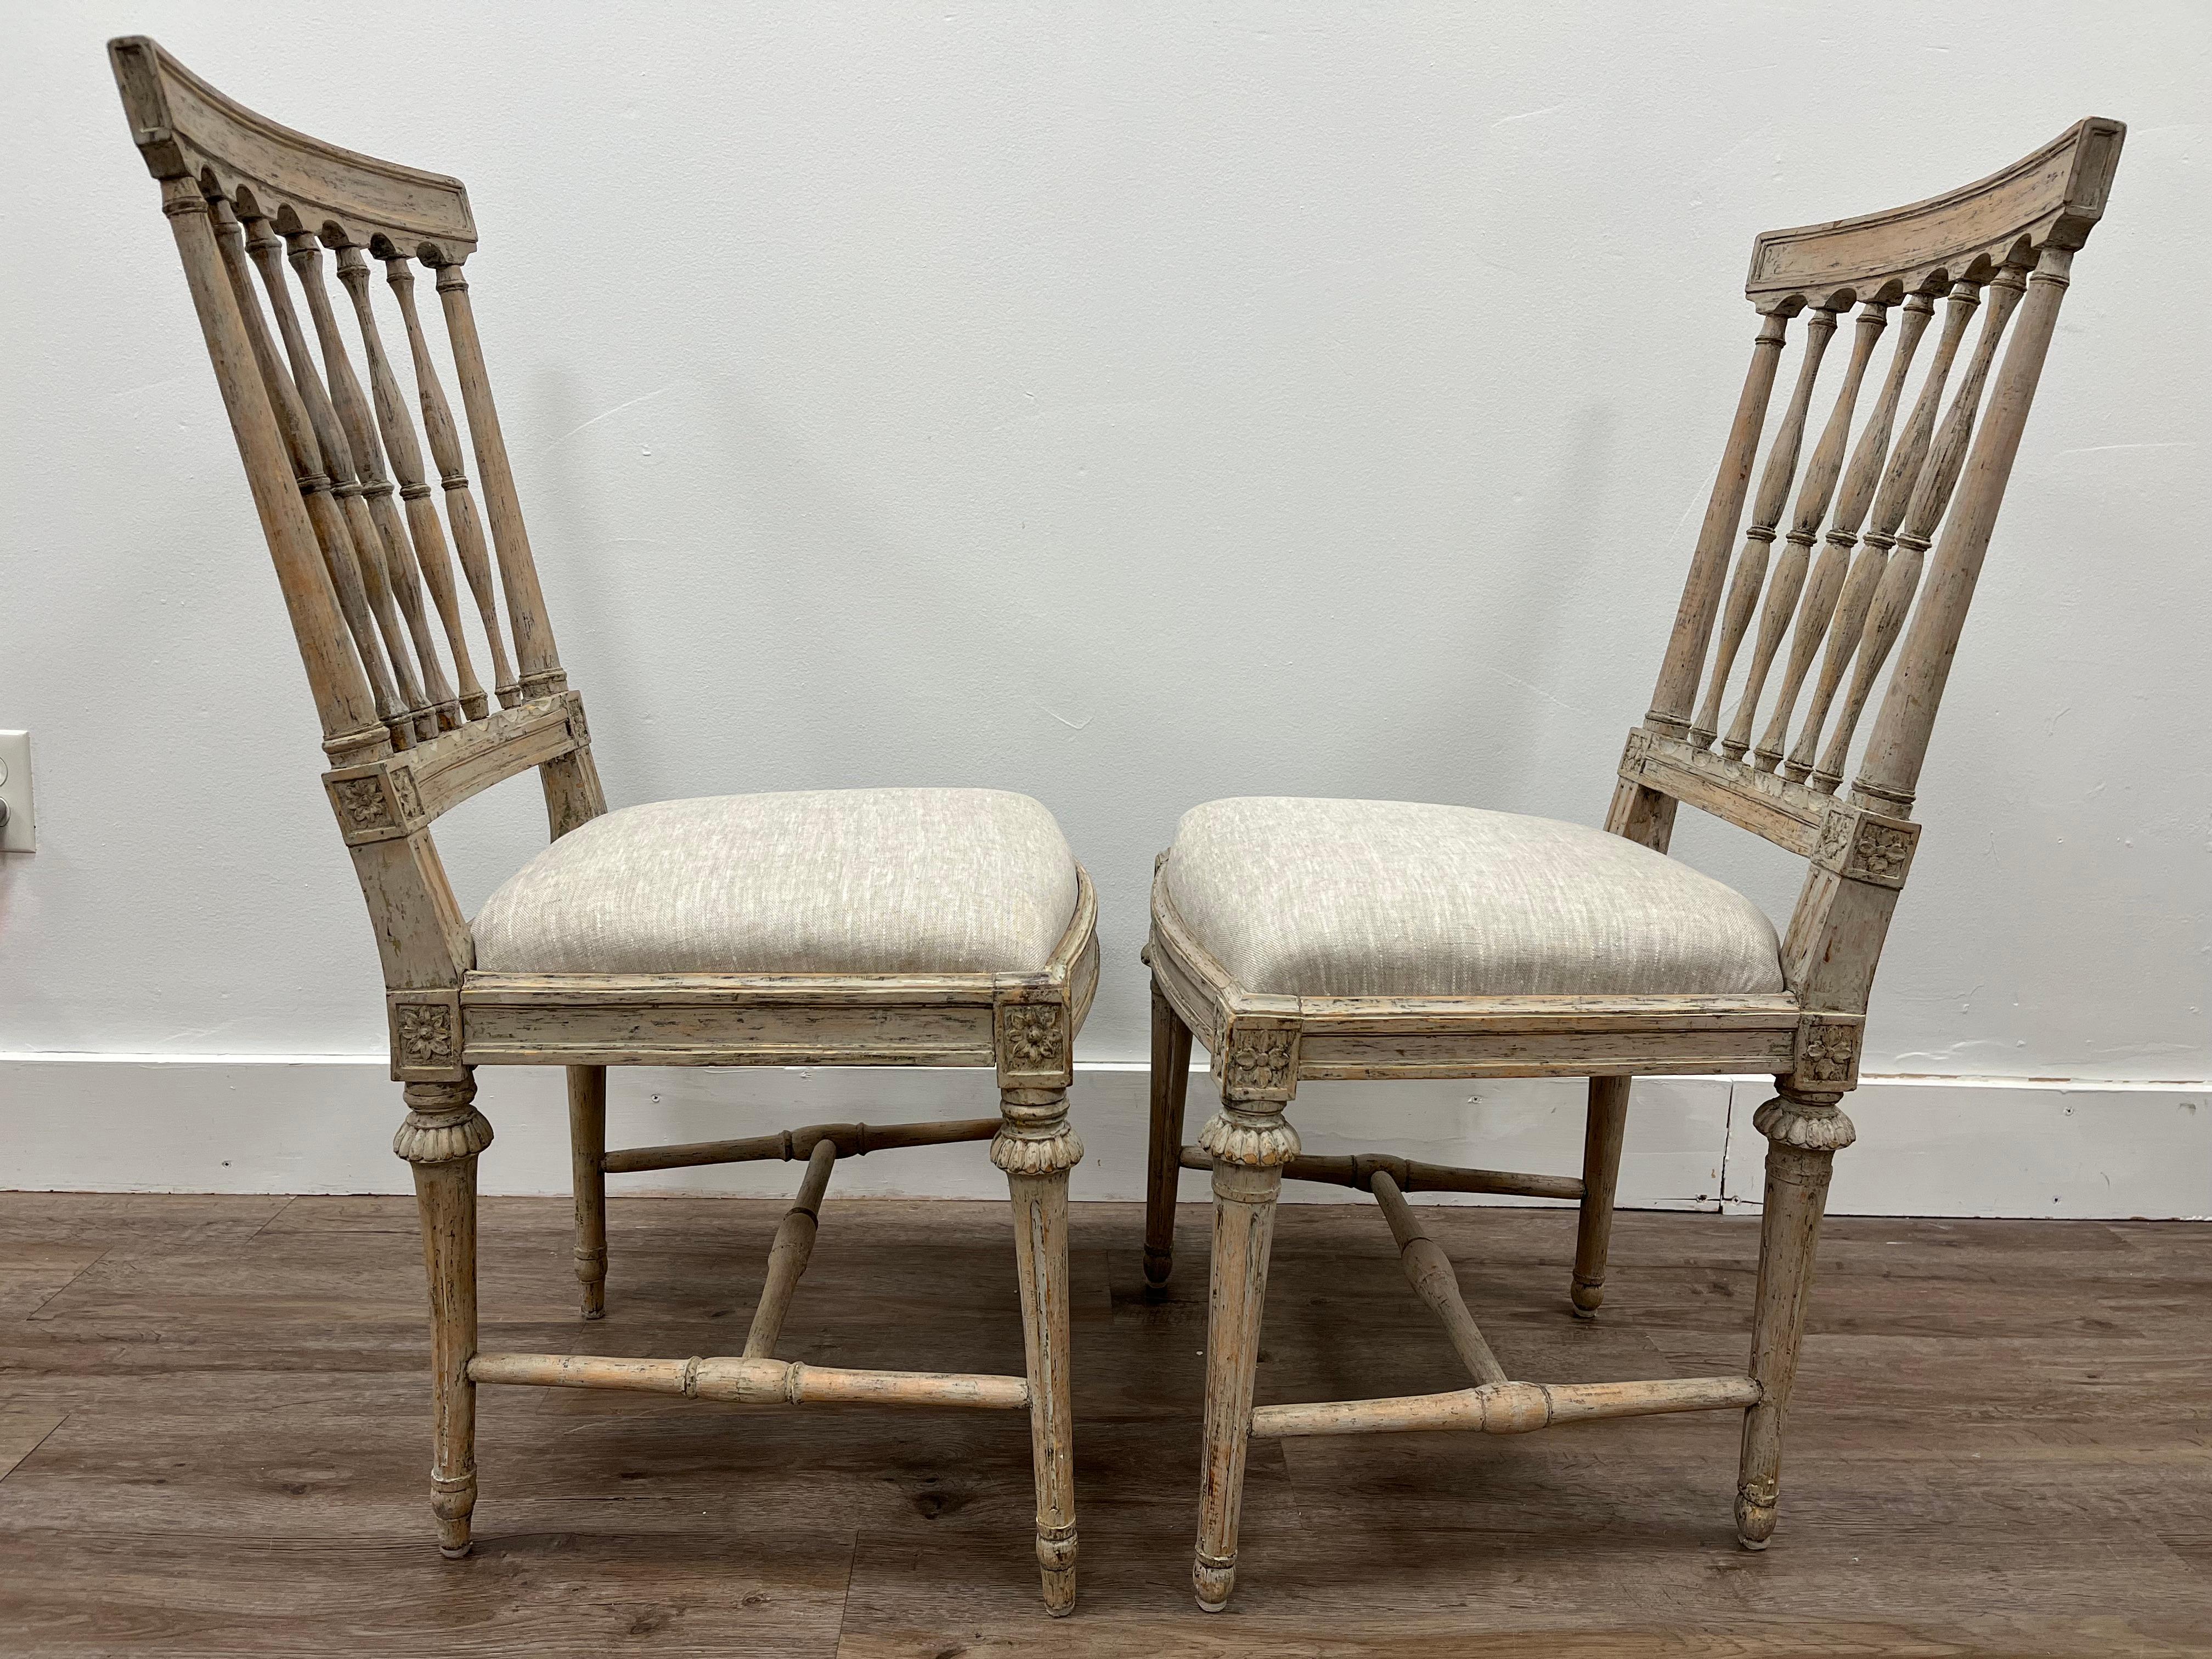 Two similar Swedish Gustavian chairs made in Stockholm. One chair by Johan Erik Hollander (1748-1813) and signed IEH. The other chair by John Hammarstrom (active 1794-1812) and signed IHS. One chair still retains its original Stockholm chair maker's